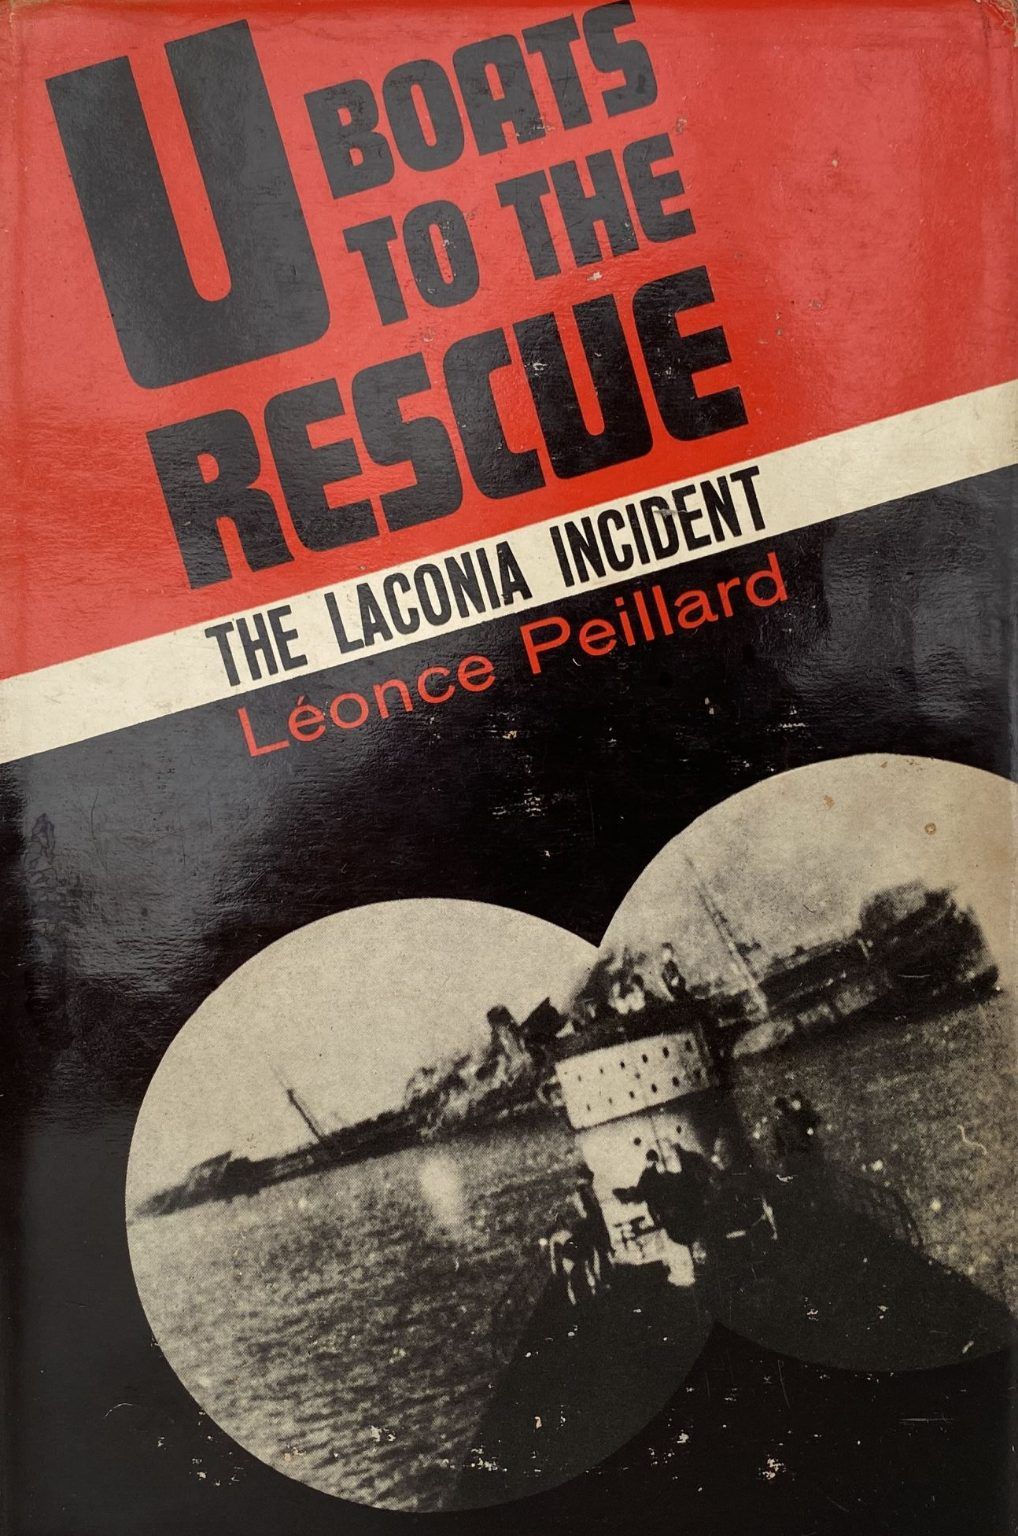 U-BOATS TO THE RESCUE: The Laconia Incident